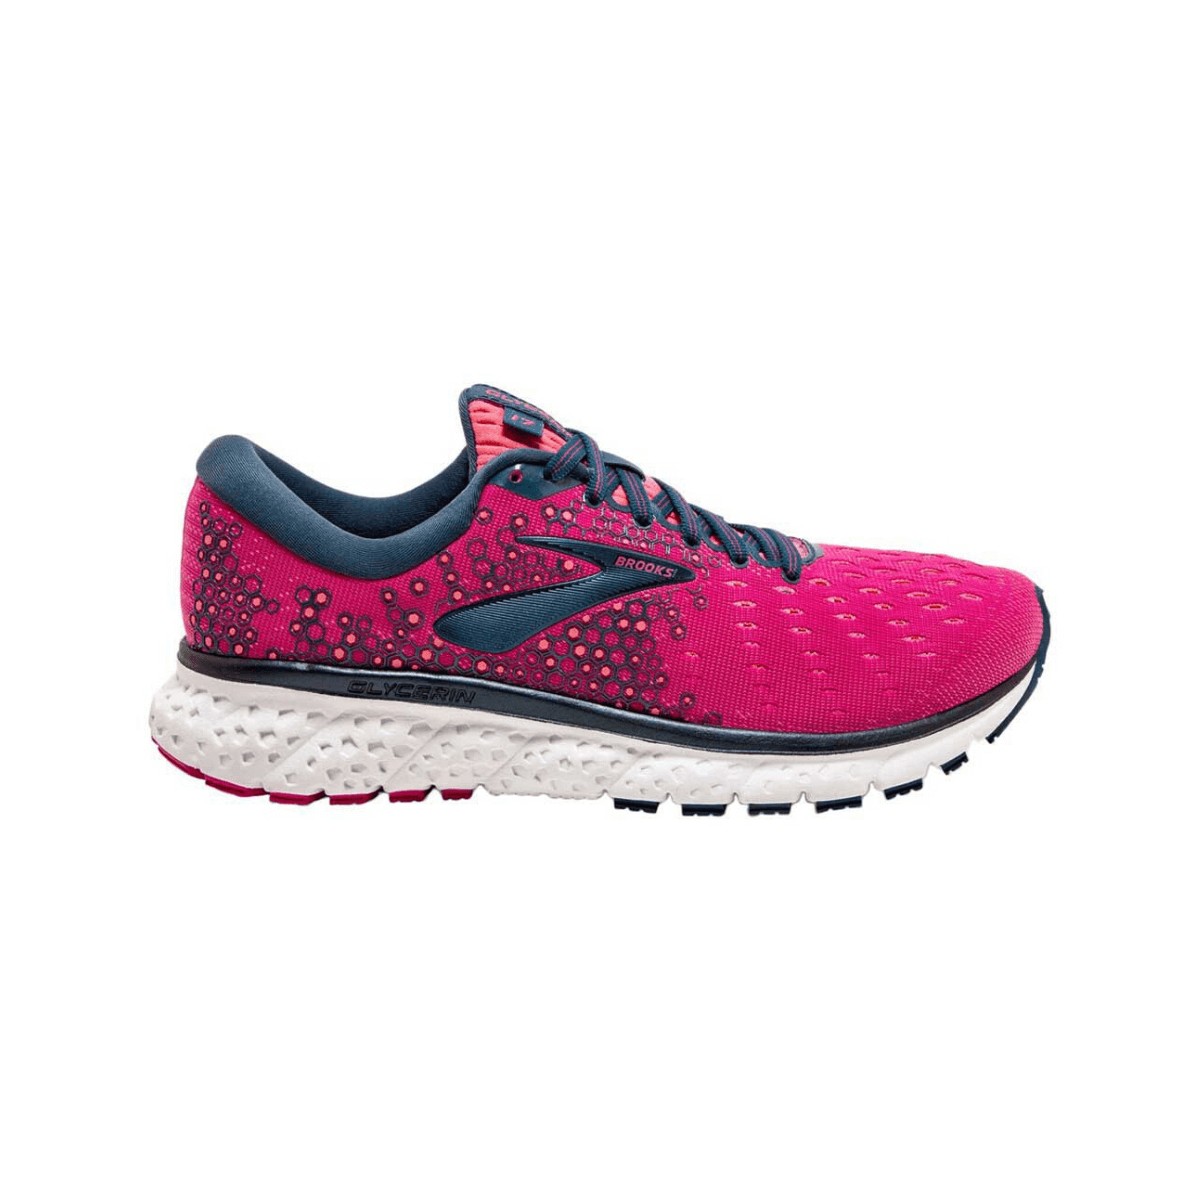 where to buy brooks shoes in store